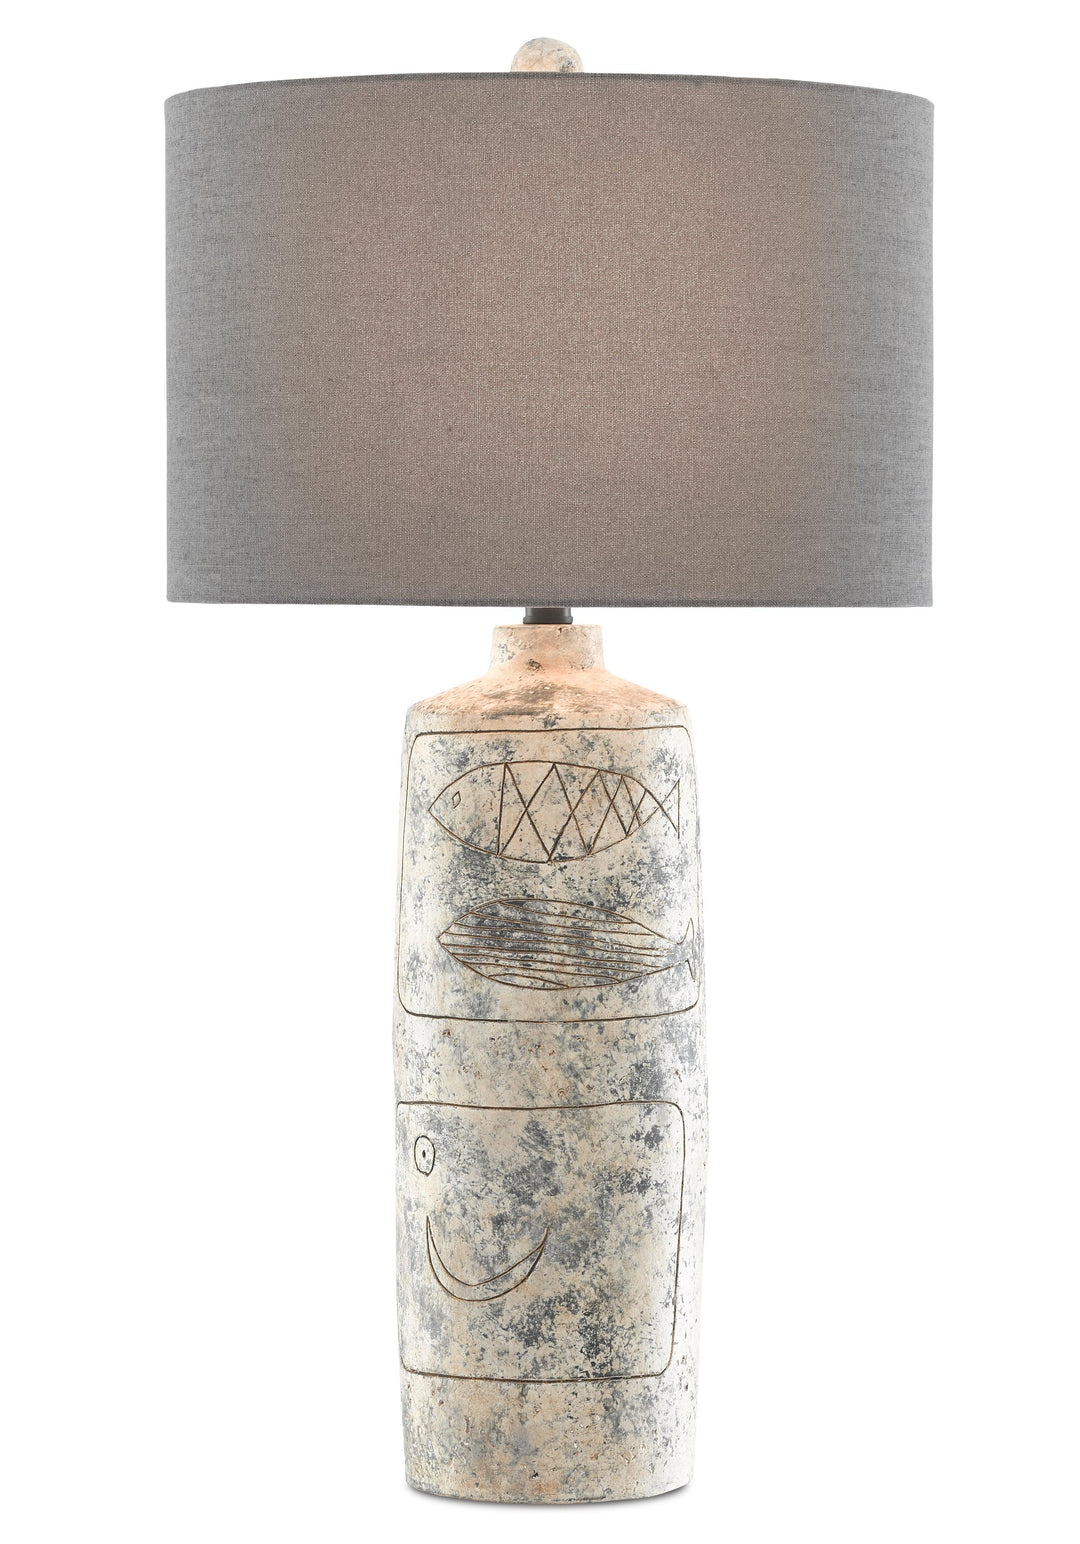 Sikes Table Lamp - Casey & Company